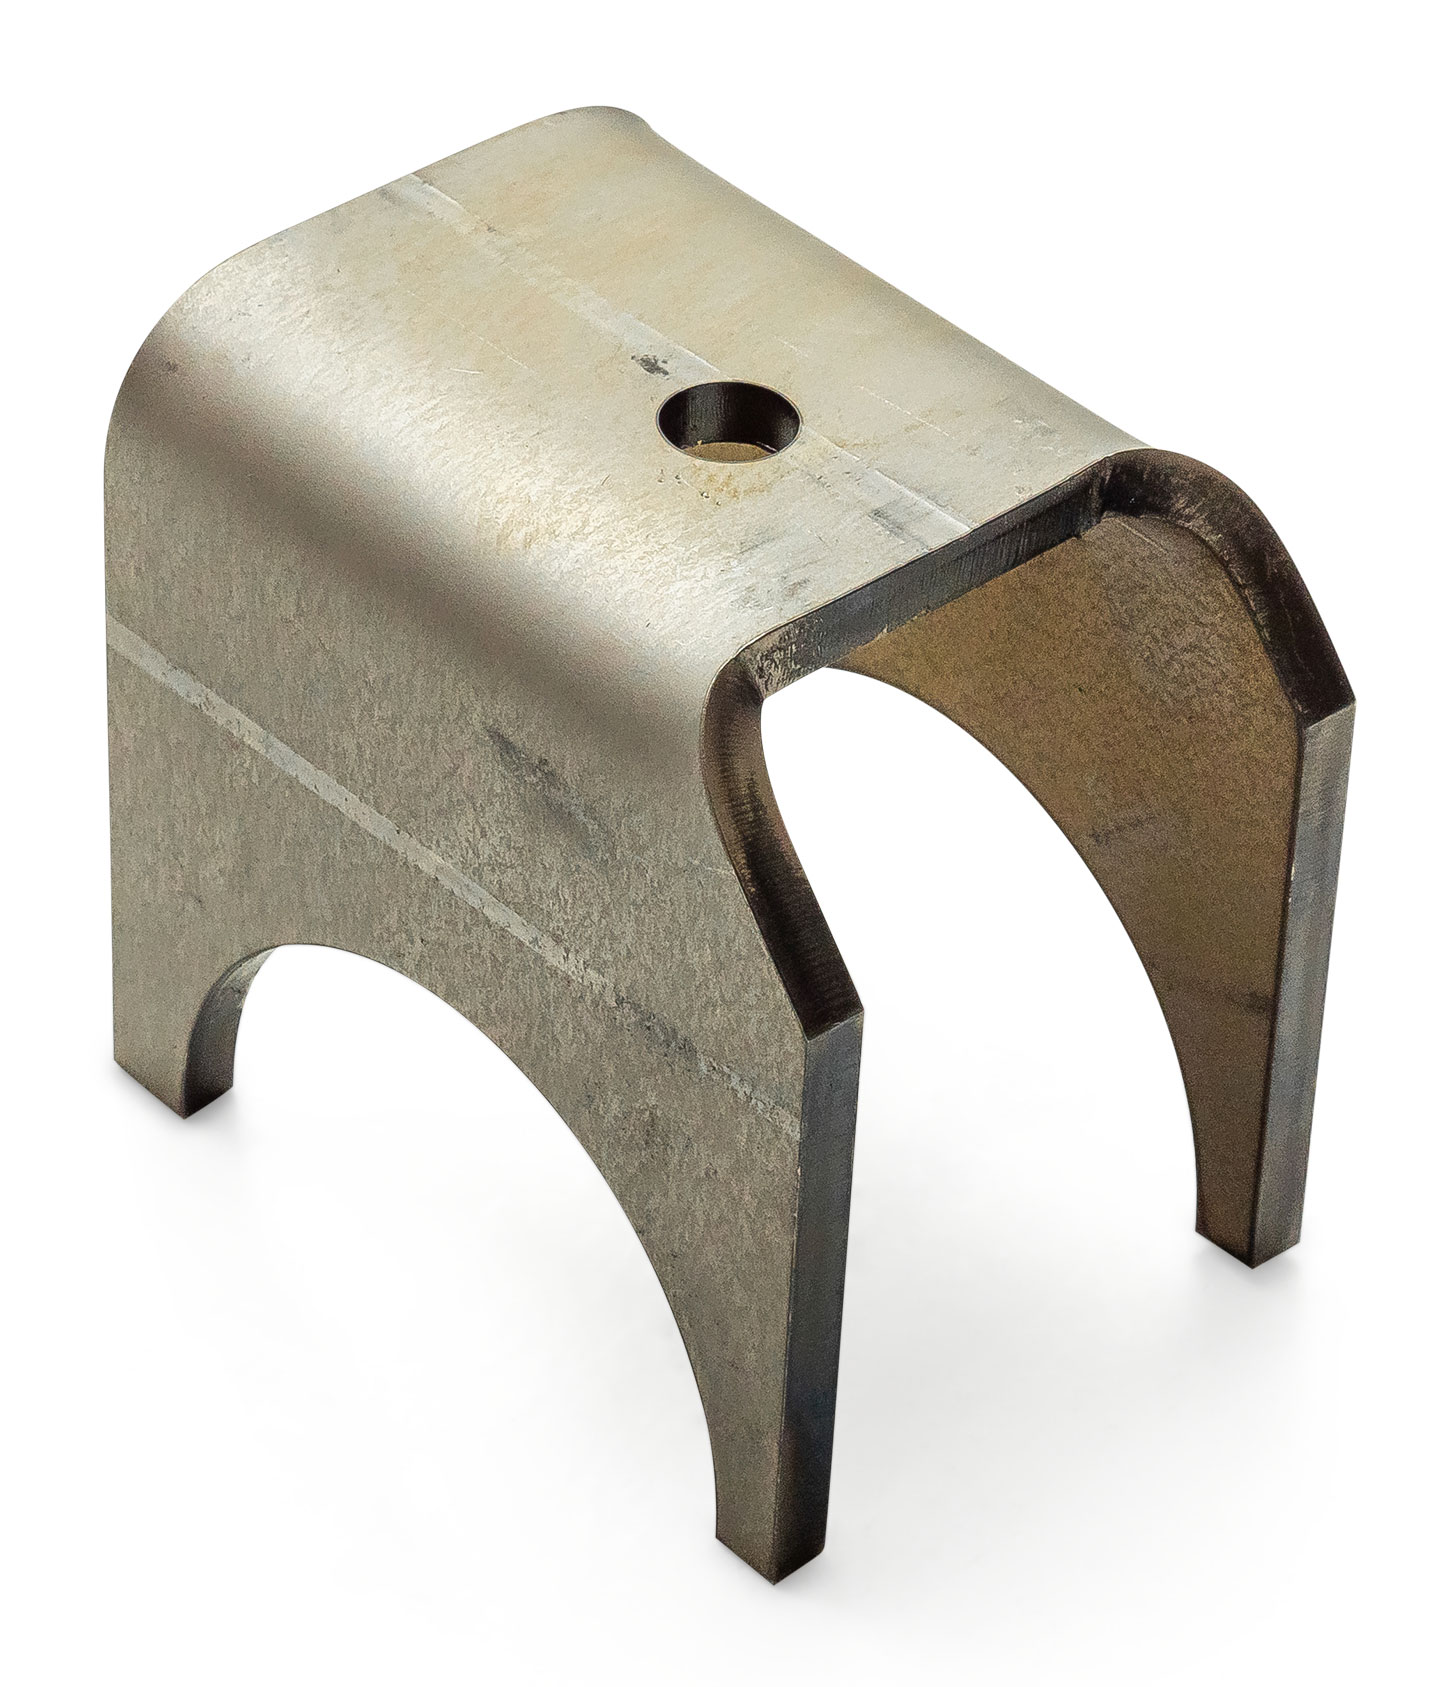 Bump Stop Mount - Dana 44 Differential Side, Weld-On